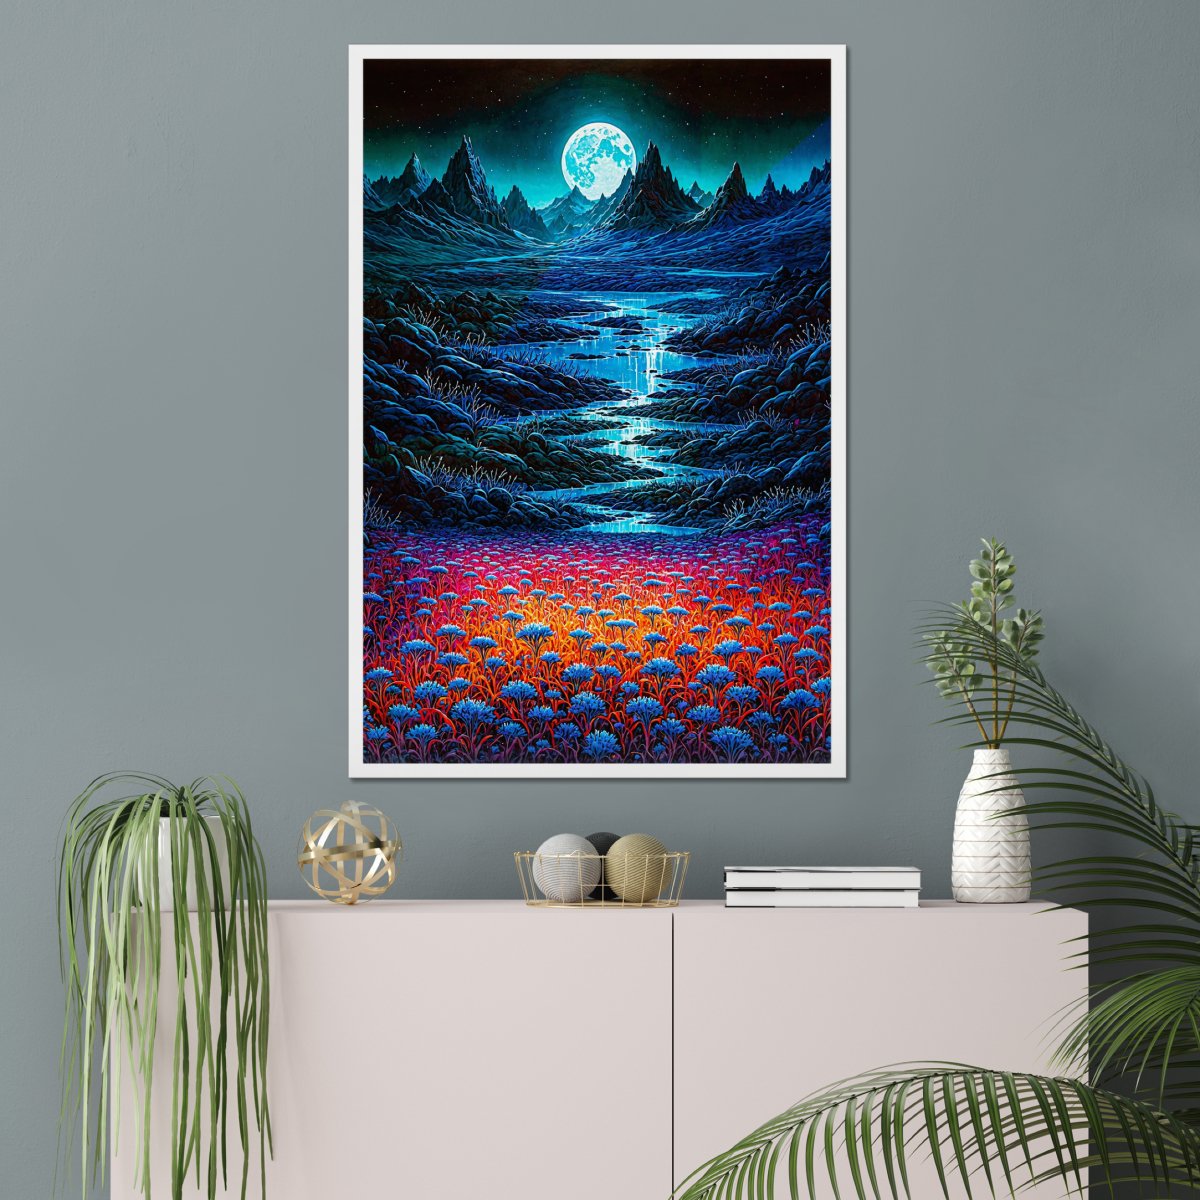 Alien night - Art print - Poster - Ever colorful